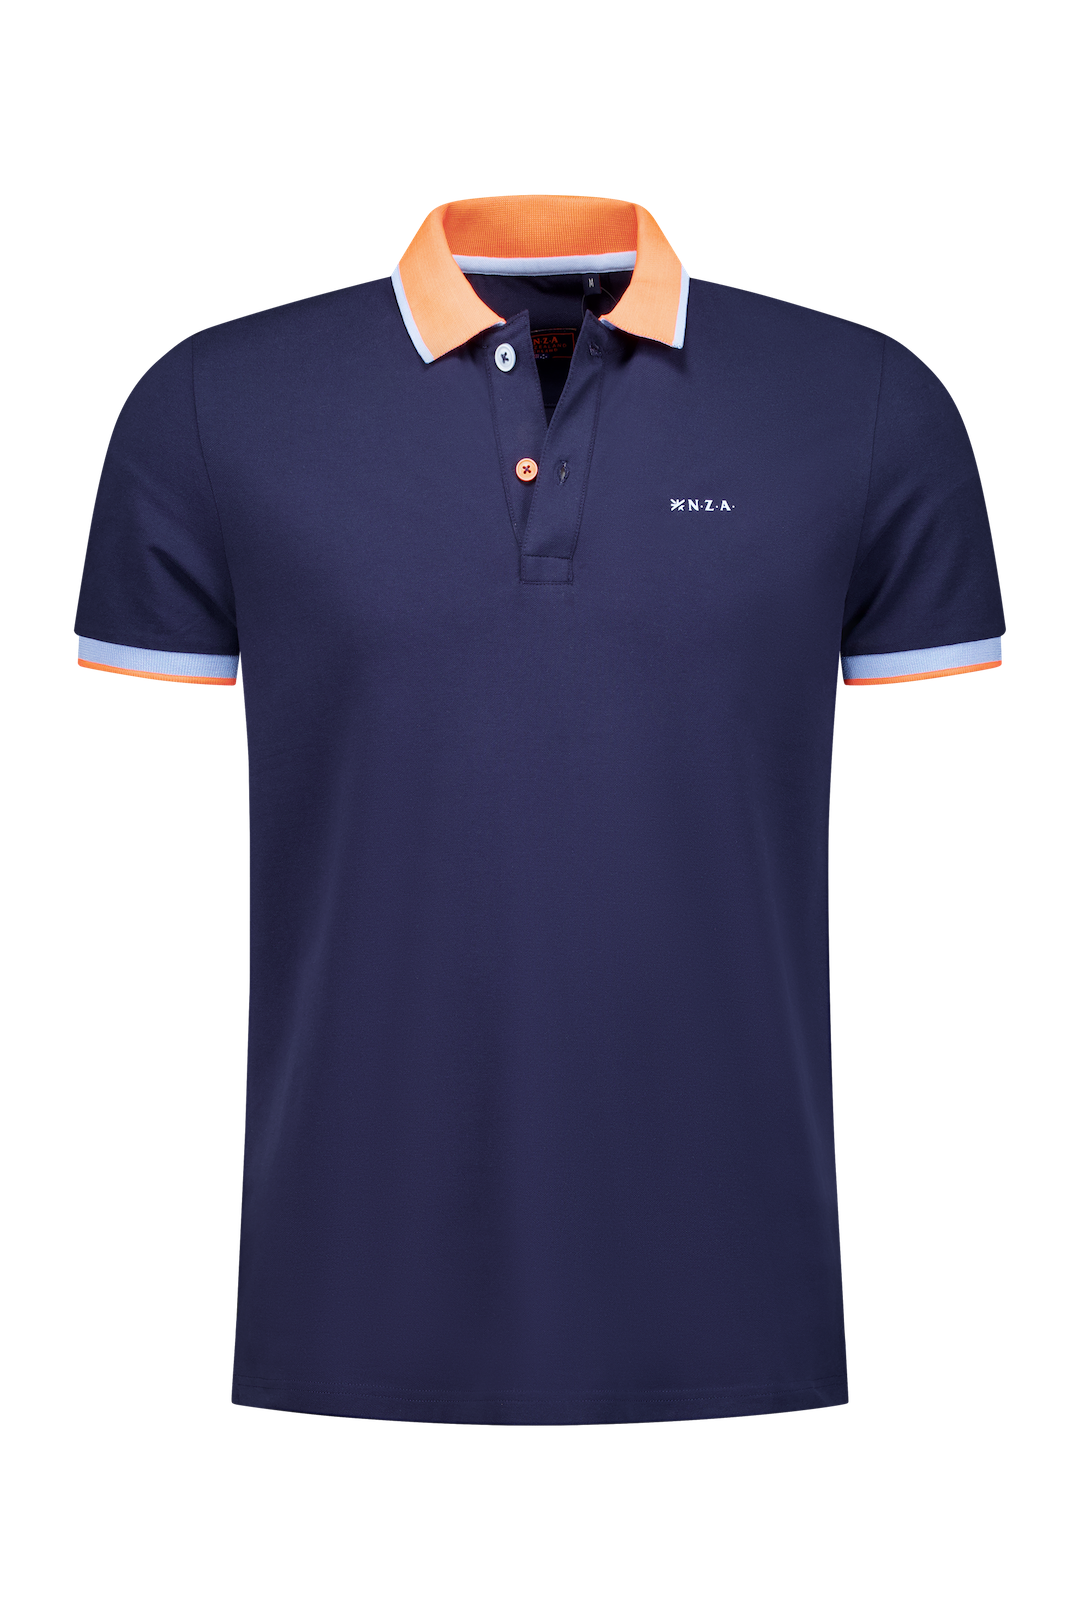 Plain poloshirt with accent colored collar - Ocean Navy